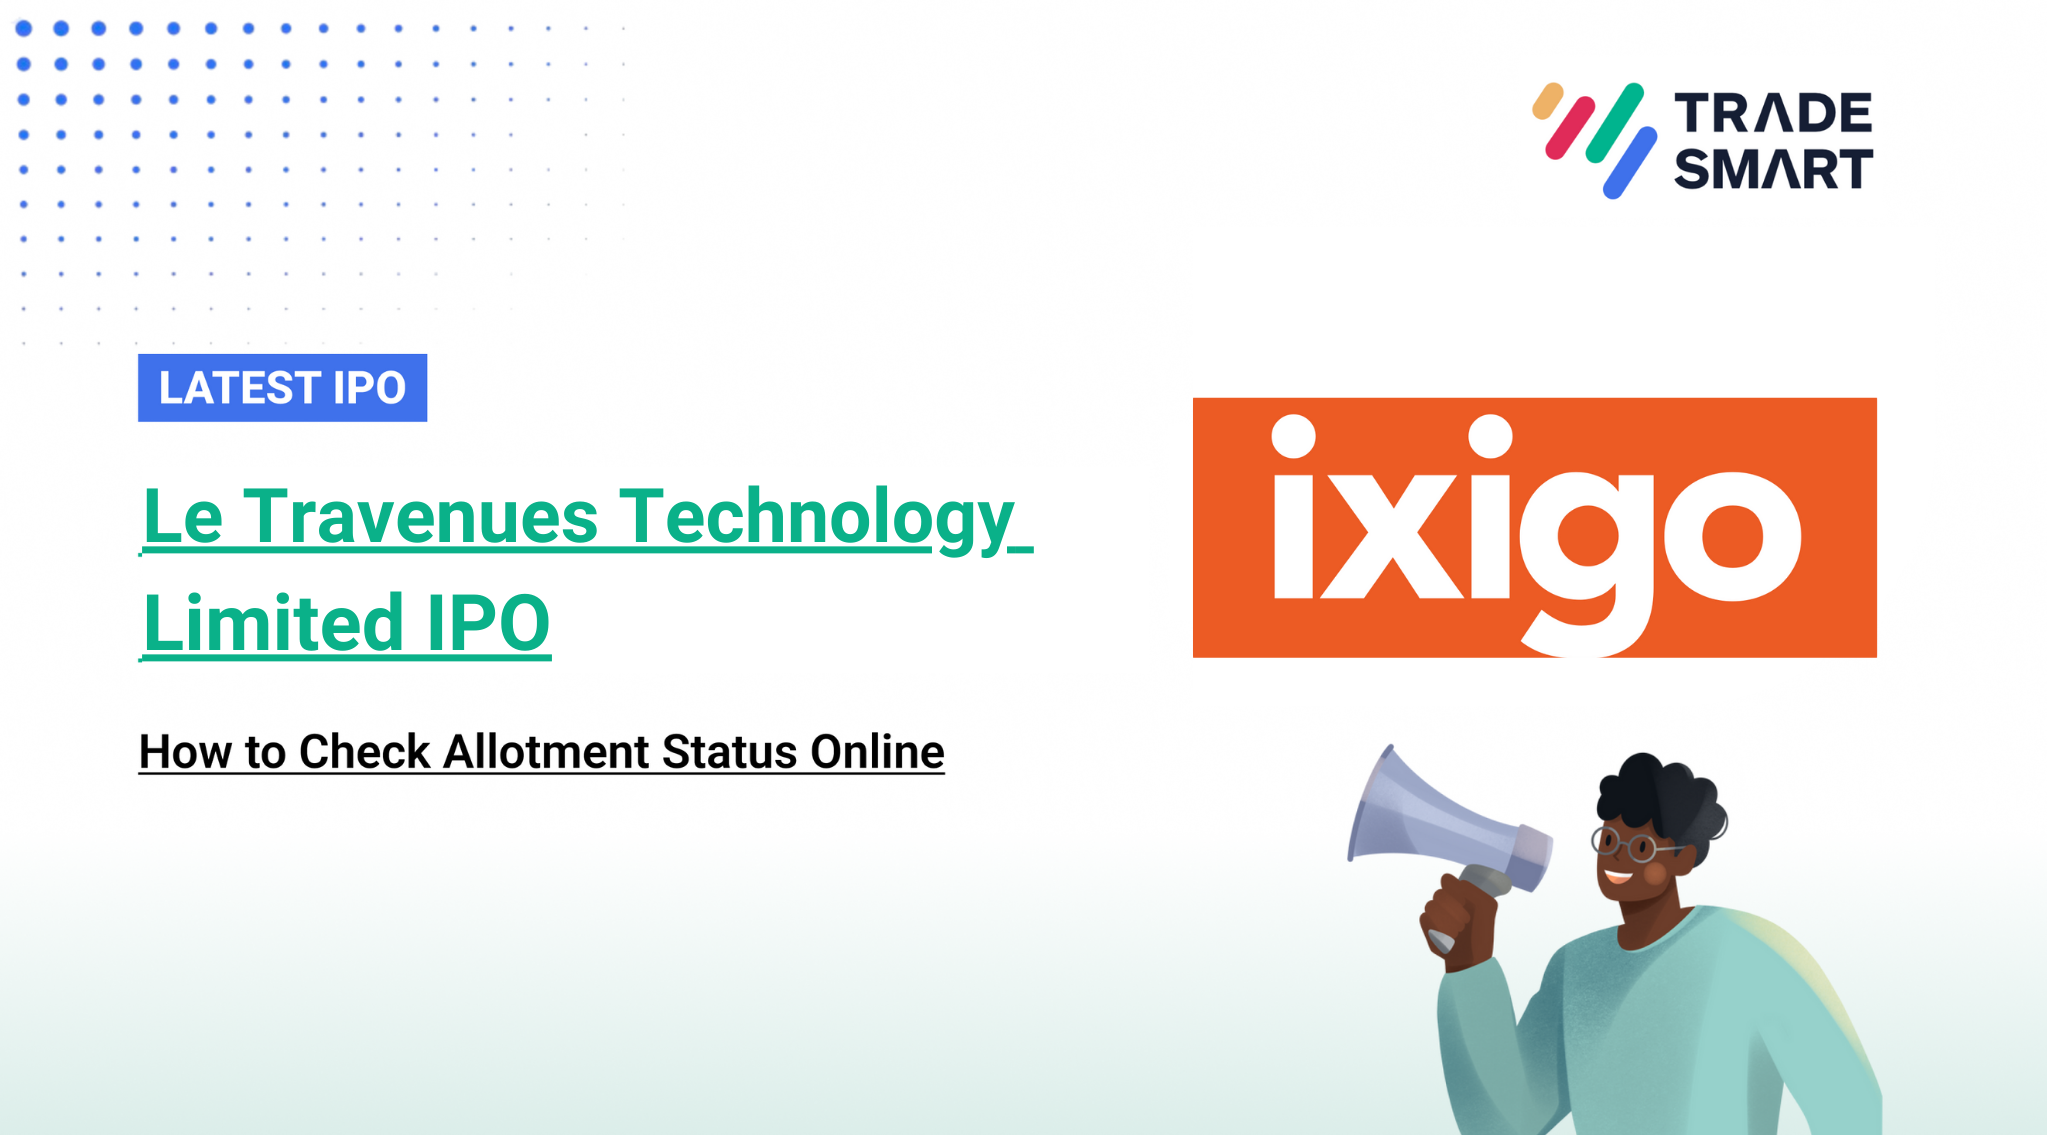 Le Travenues Technology Limited IPO Allotment status